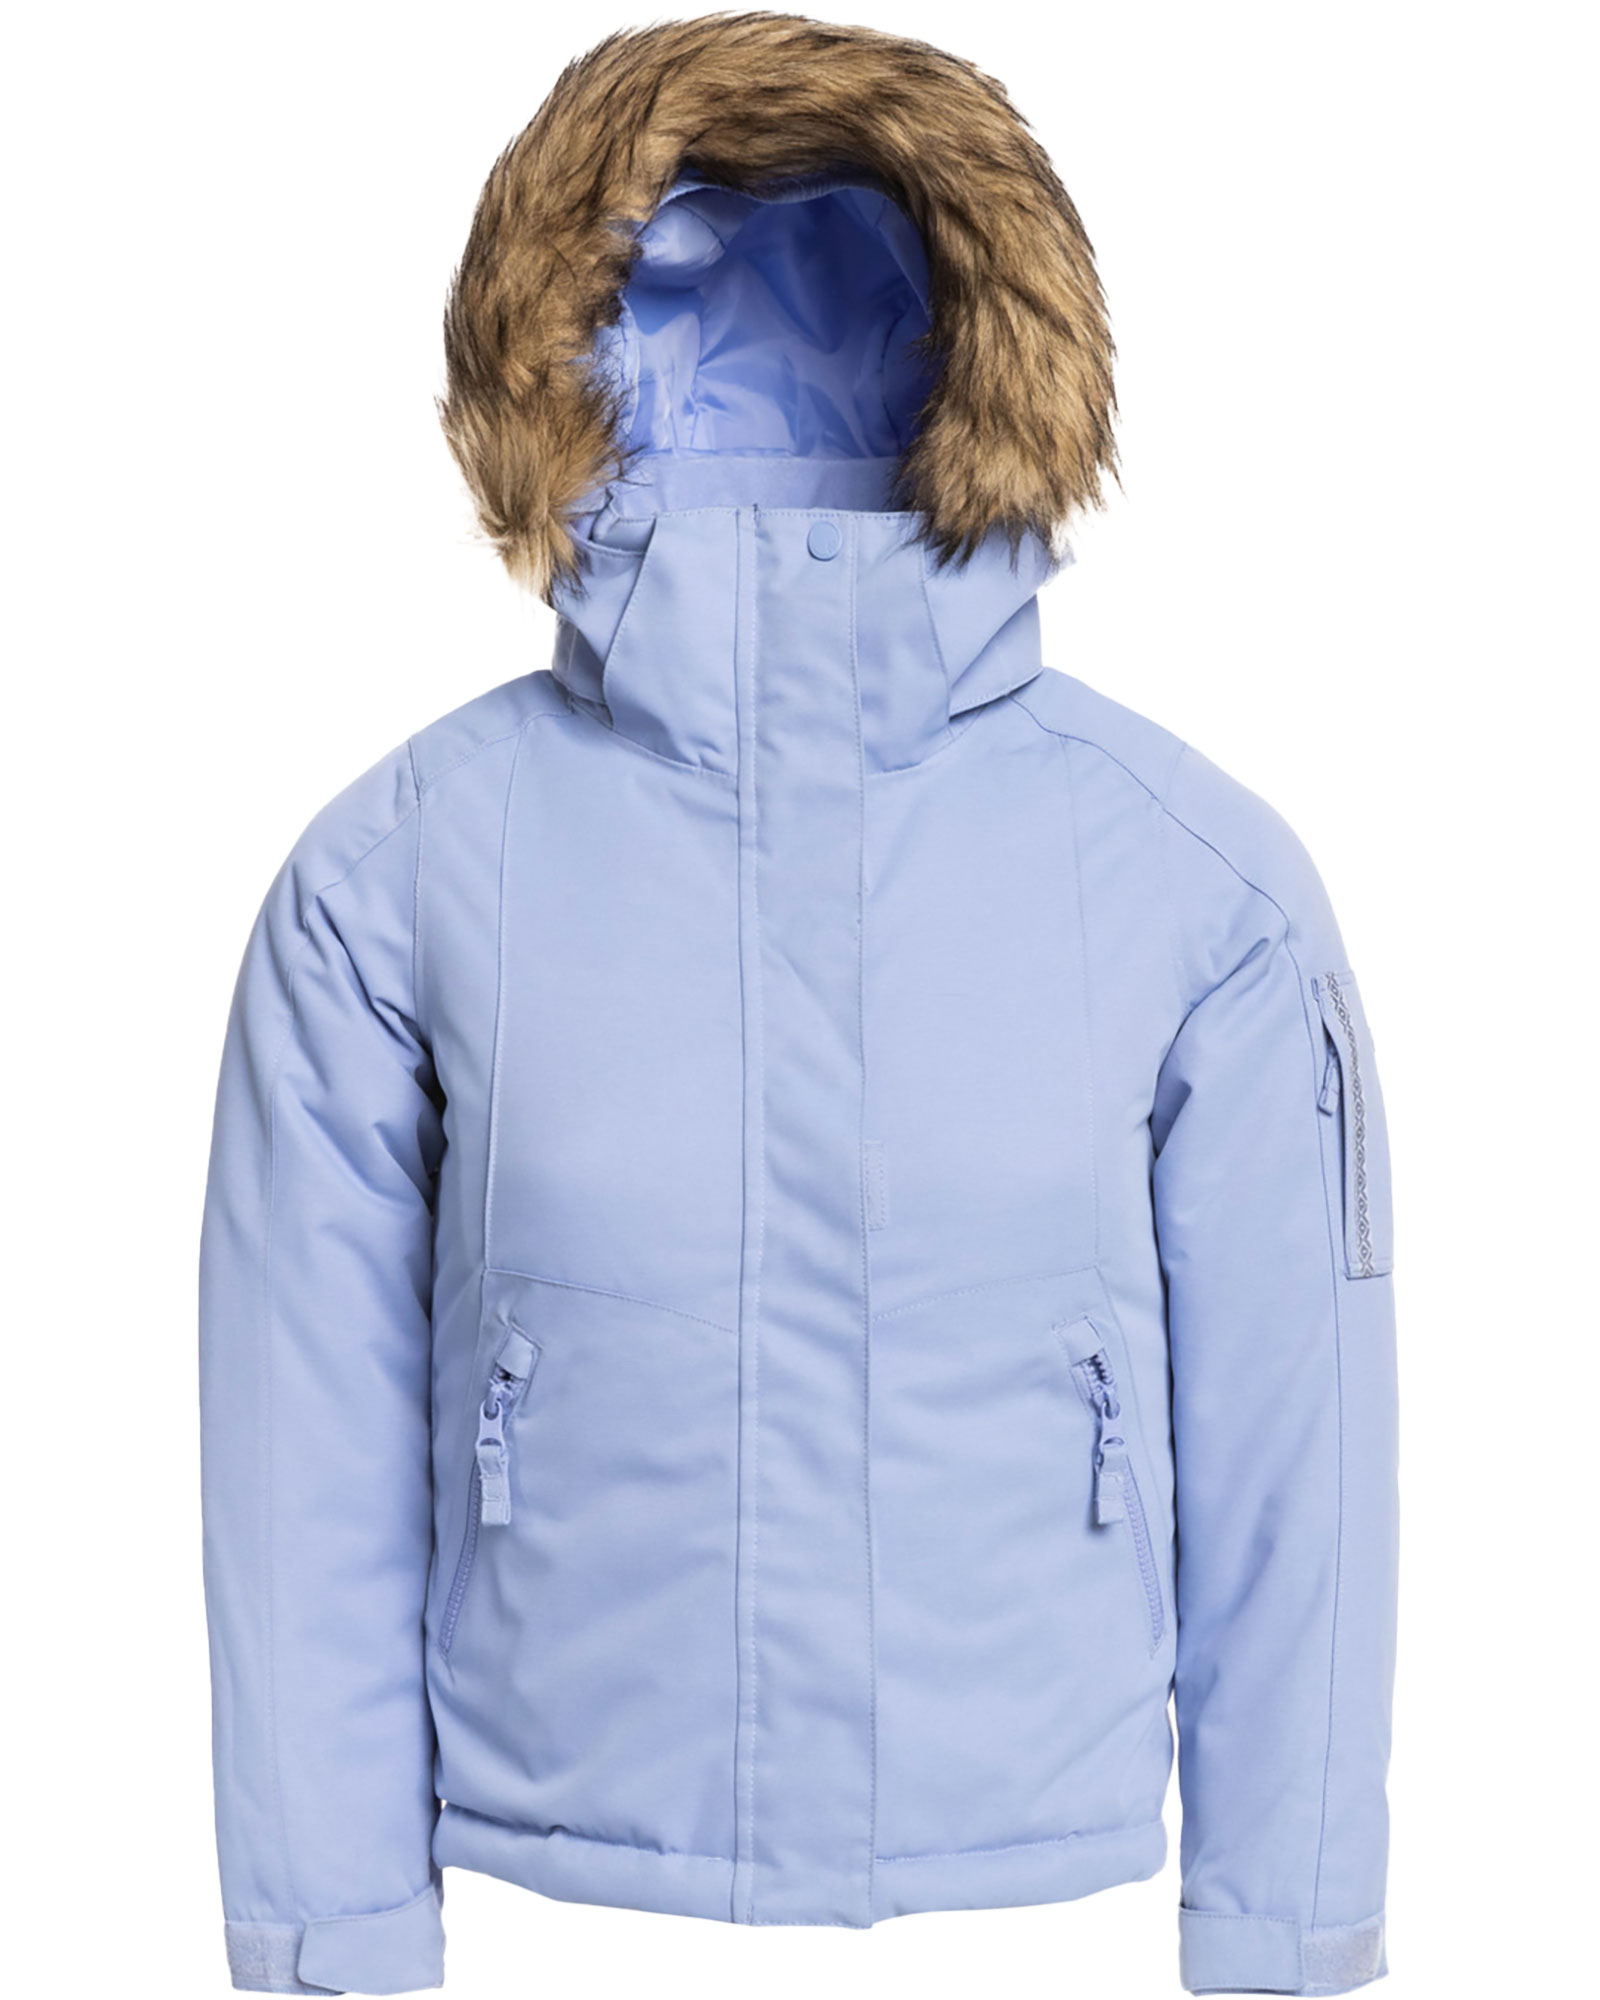 Product image of Roxy Mead Kids' Jacket